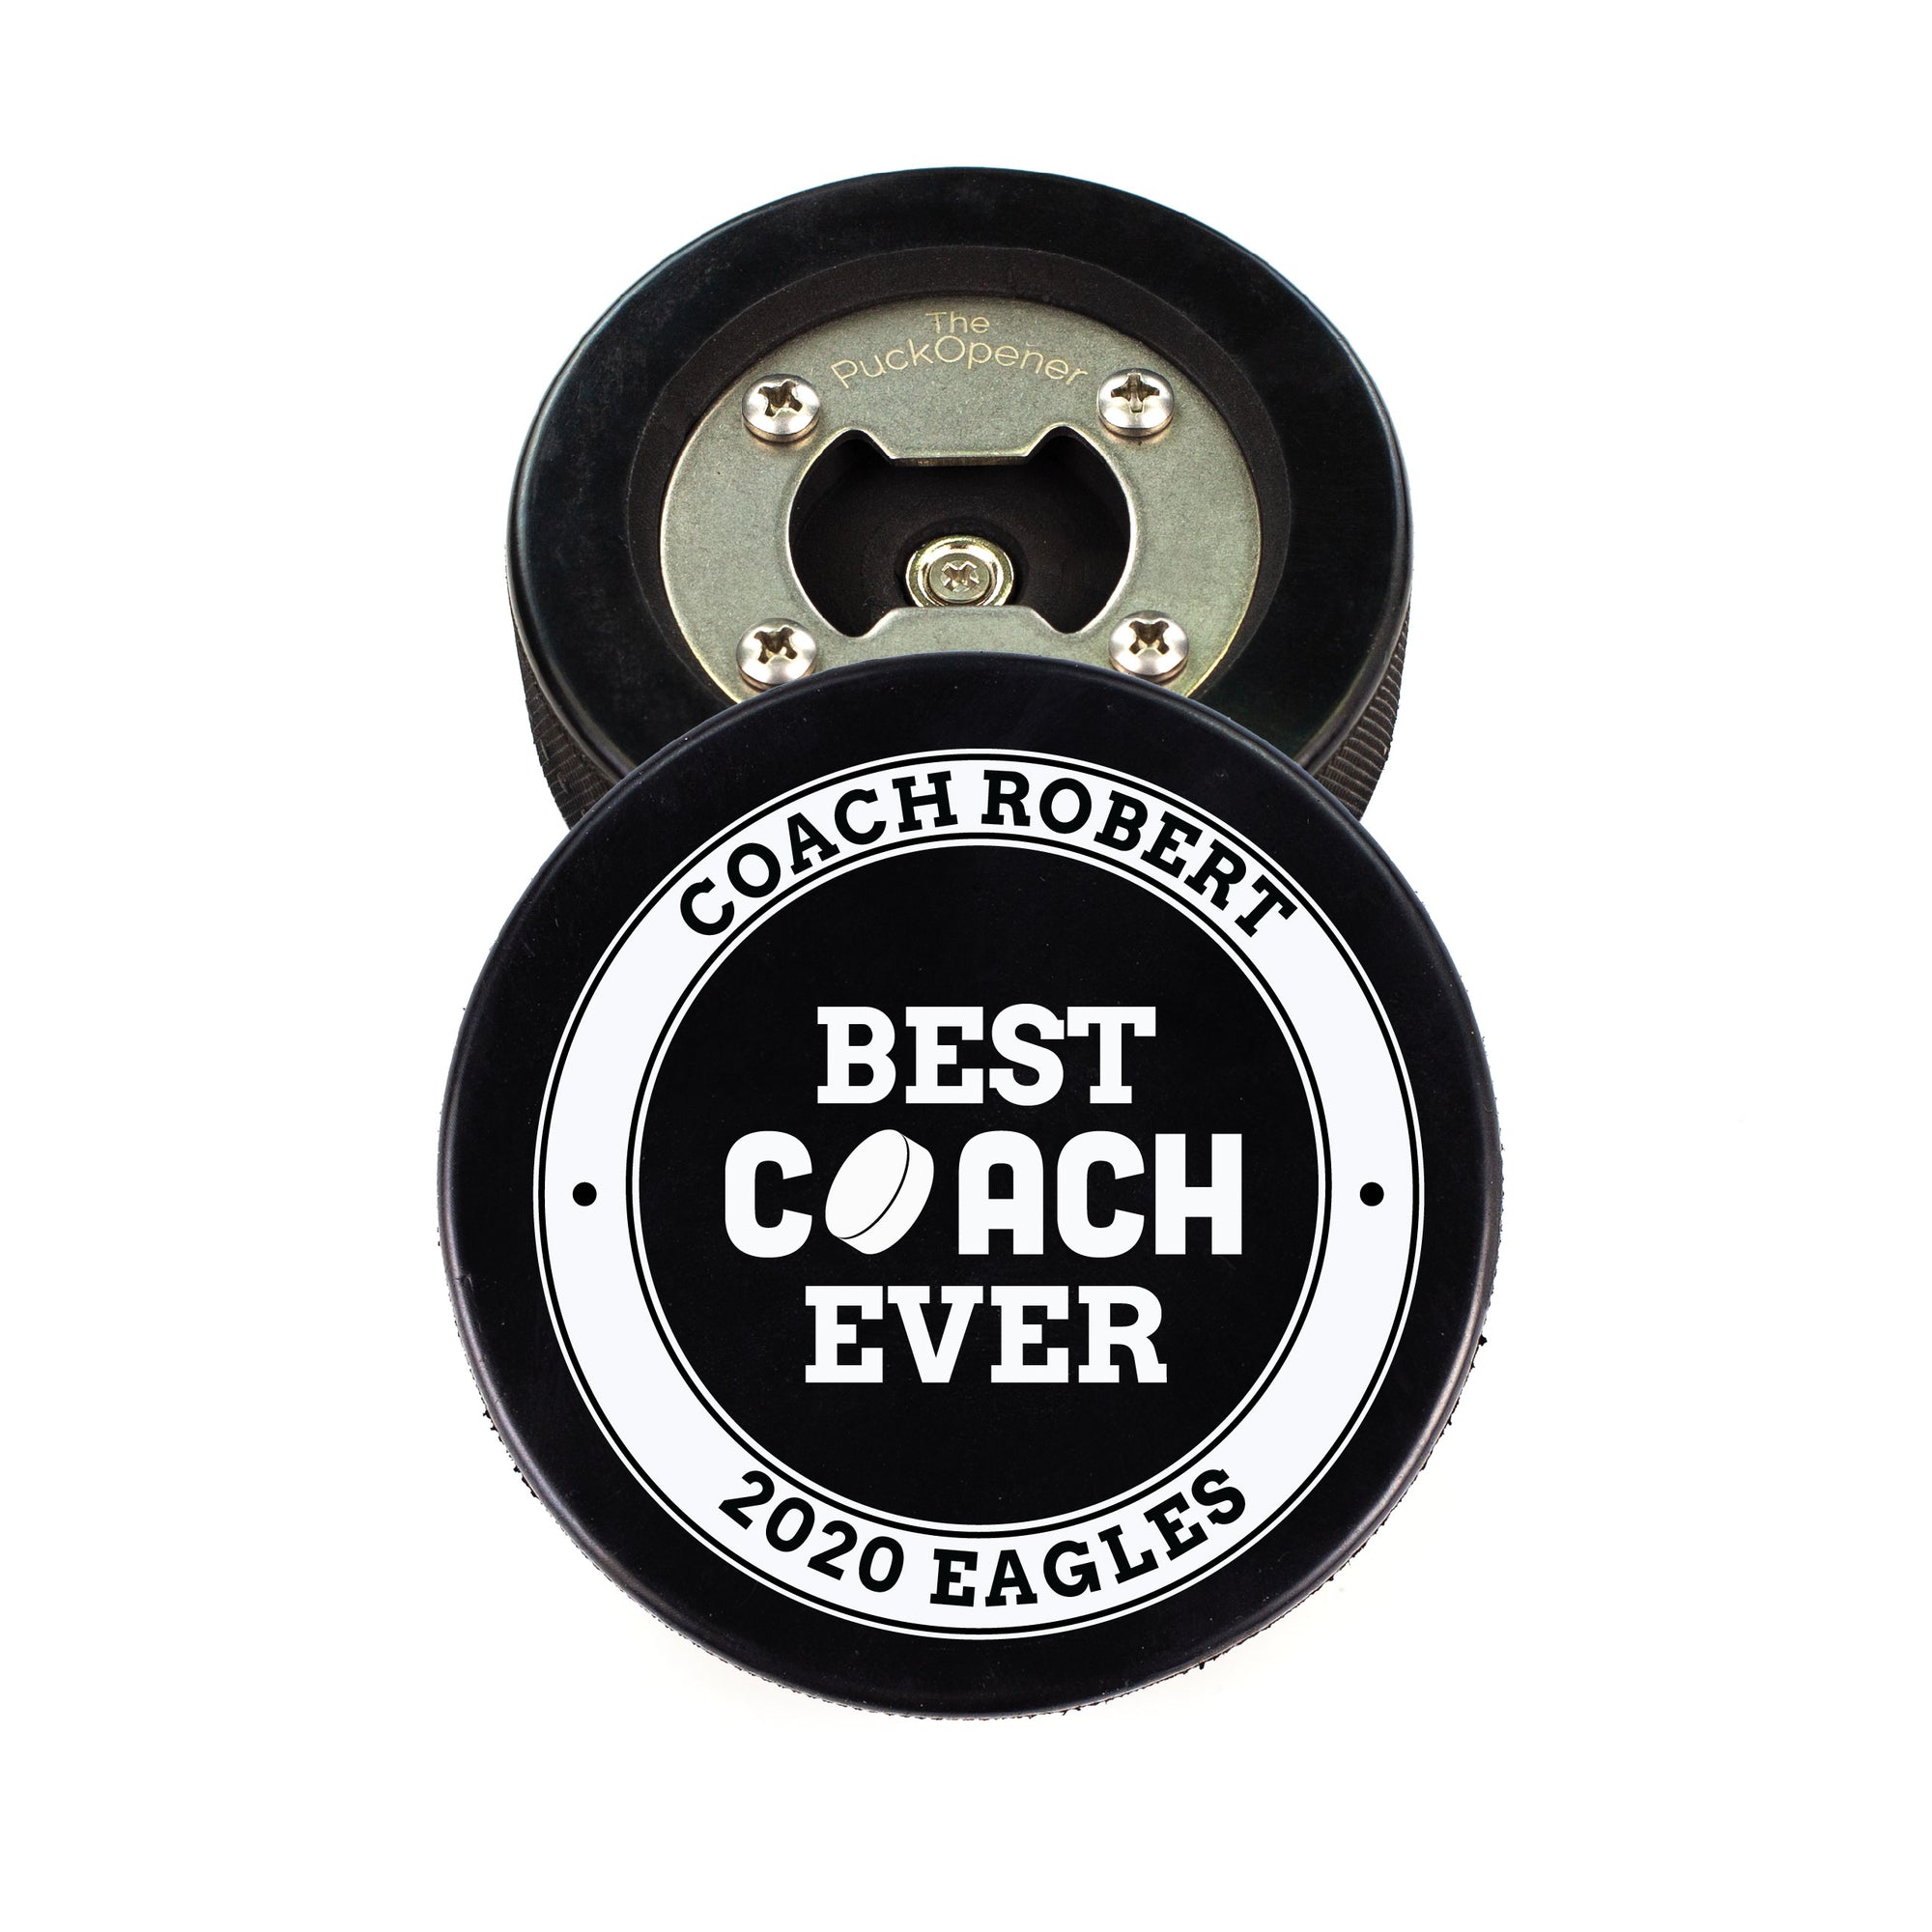 Hockey Puck Bottle Opener with Best Coach Ever Personalization Design